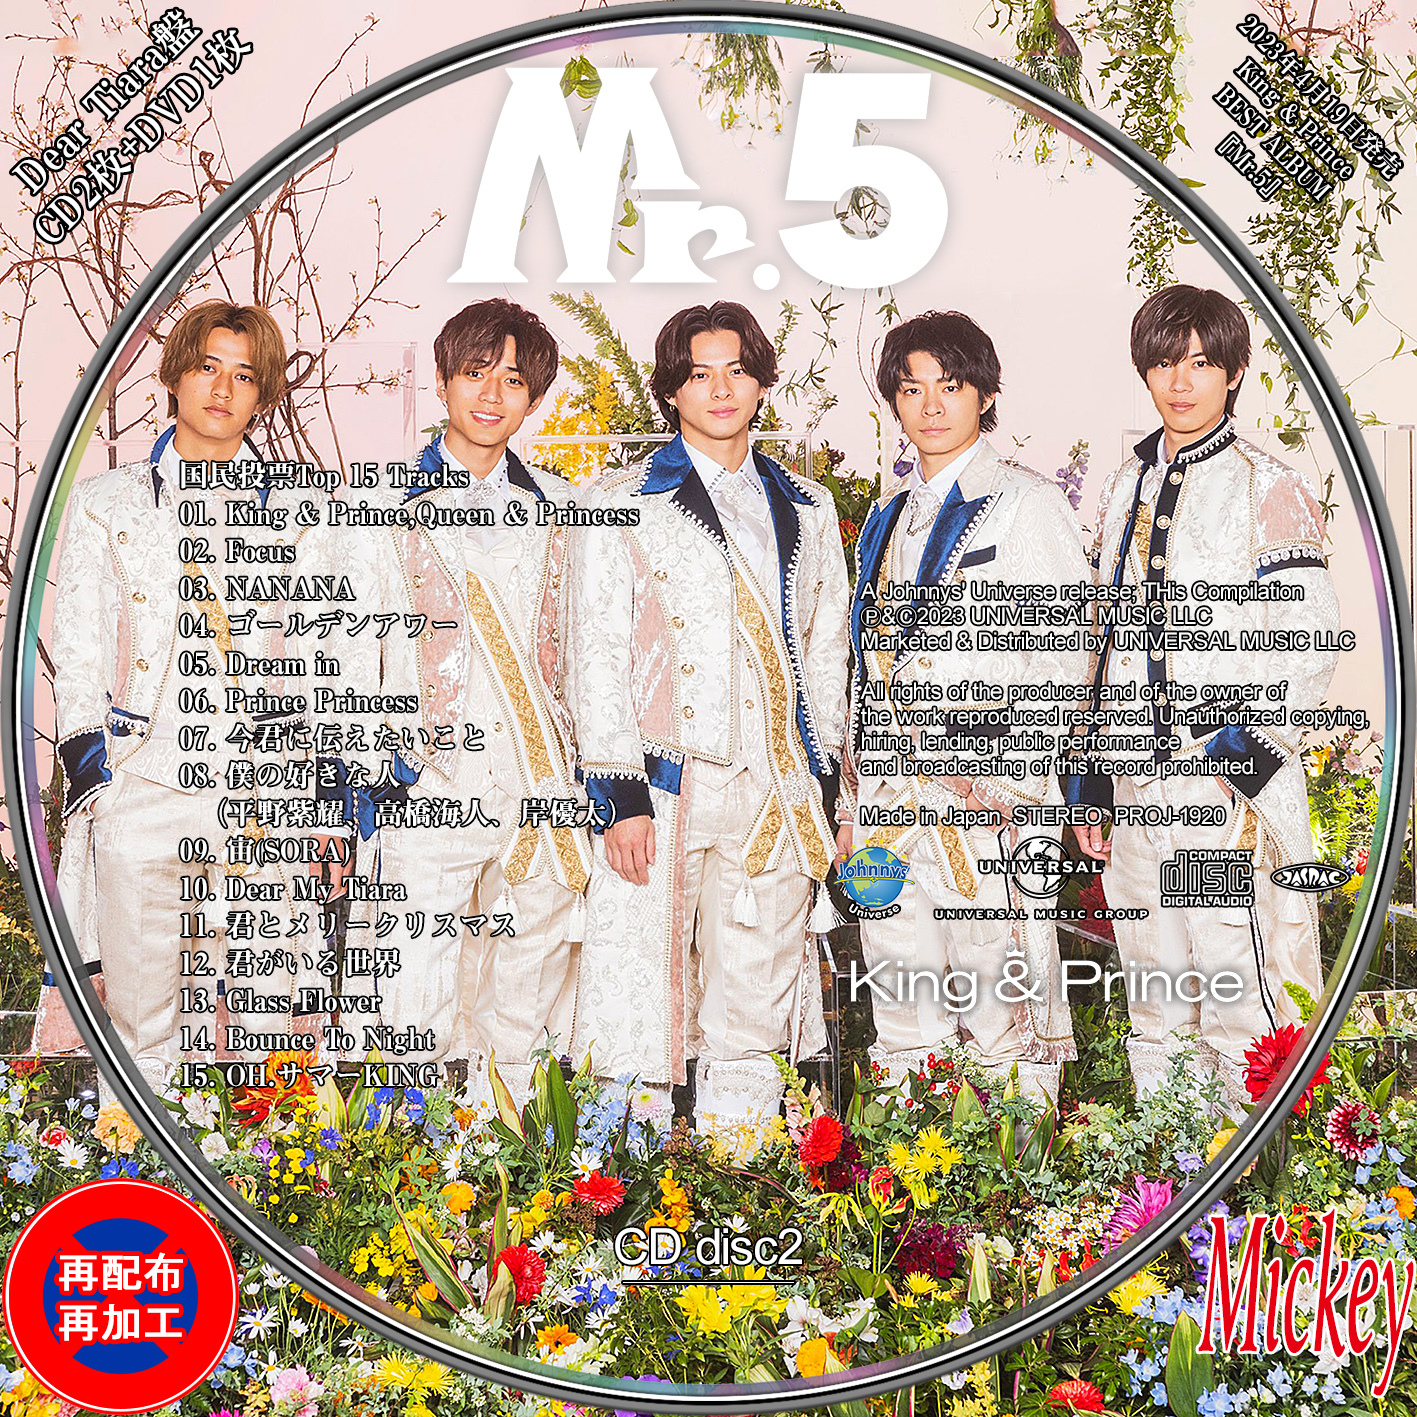 King & Prince『Mr.5』Dear Tiara盤（2CD+DVD） : Mickey's Request Label Collection